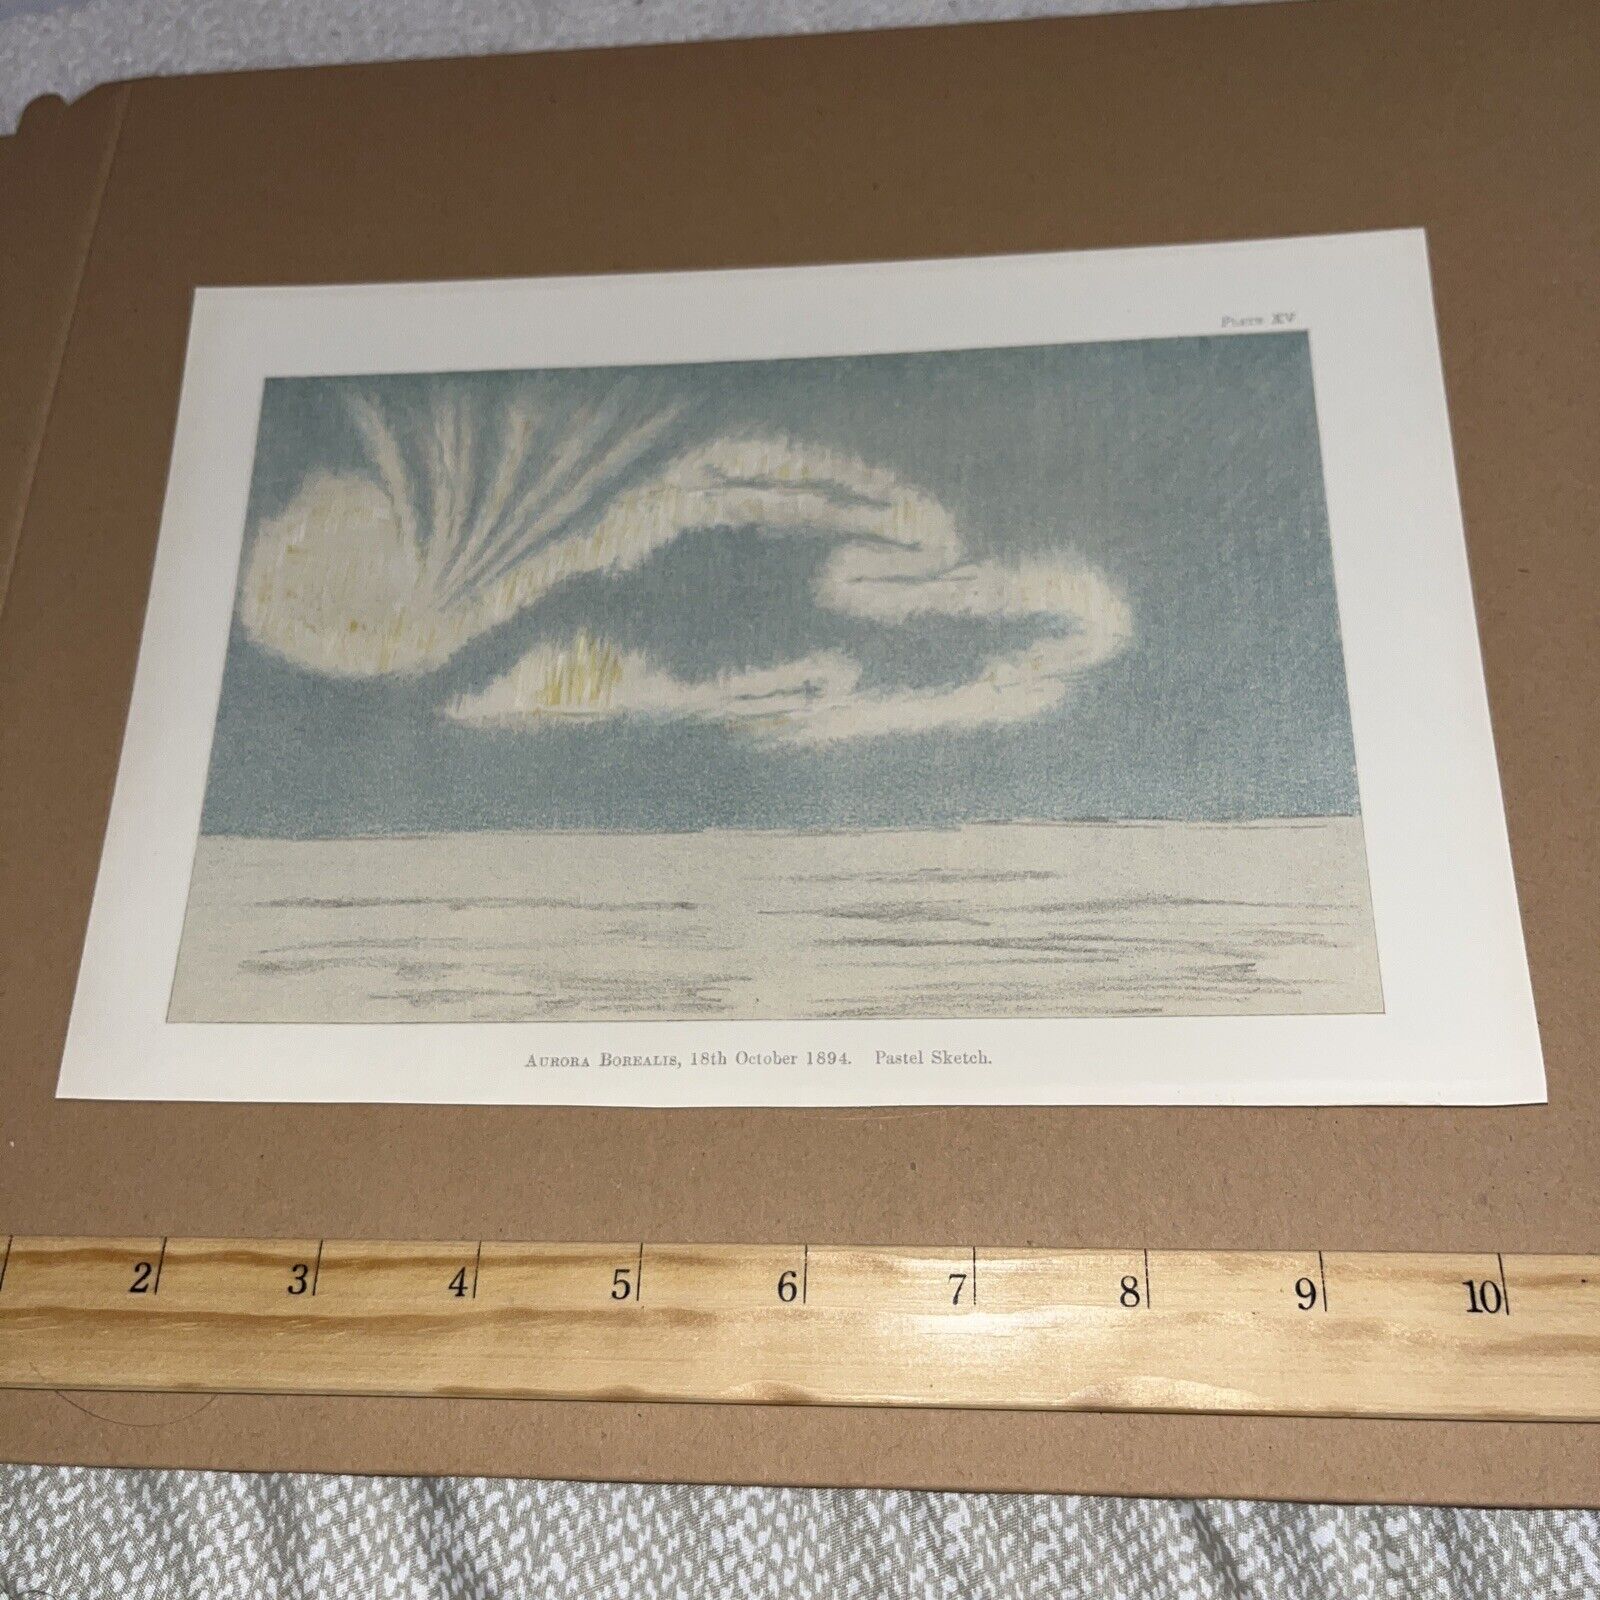 Antique 1898 Plate of a Pastel Sketch of an October 1894 Aurora Borealis